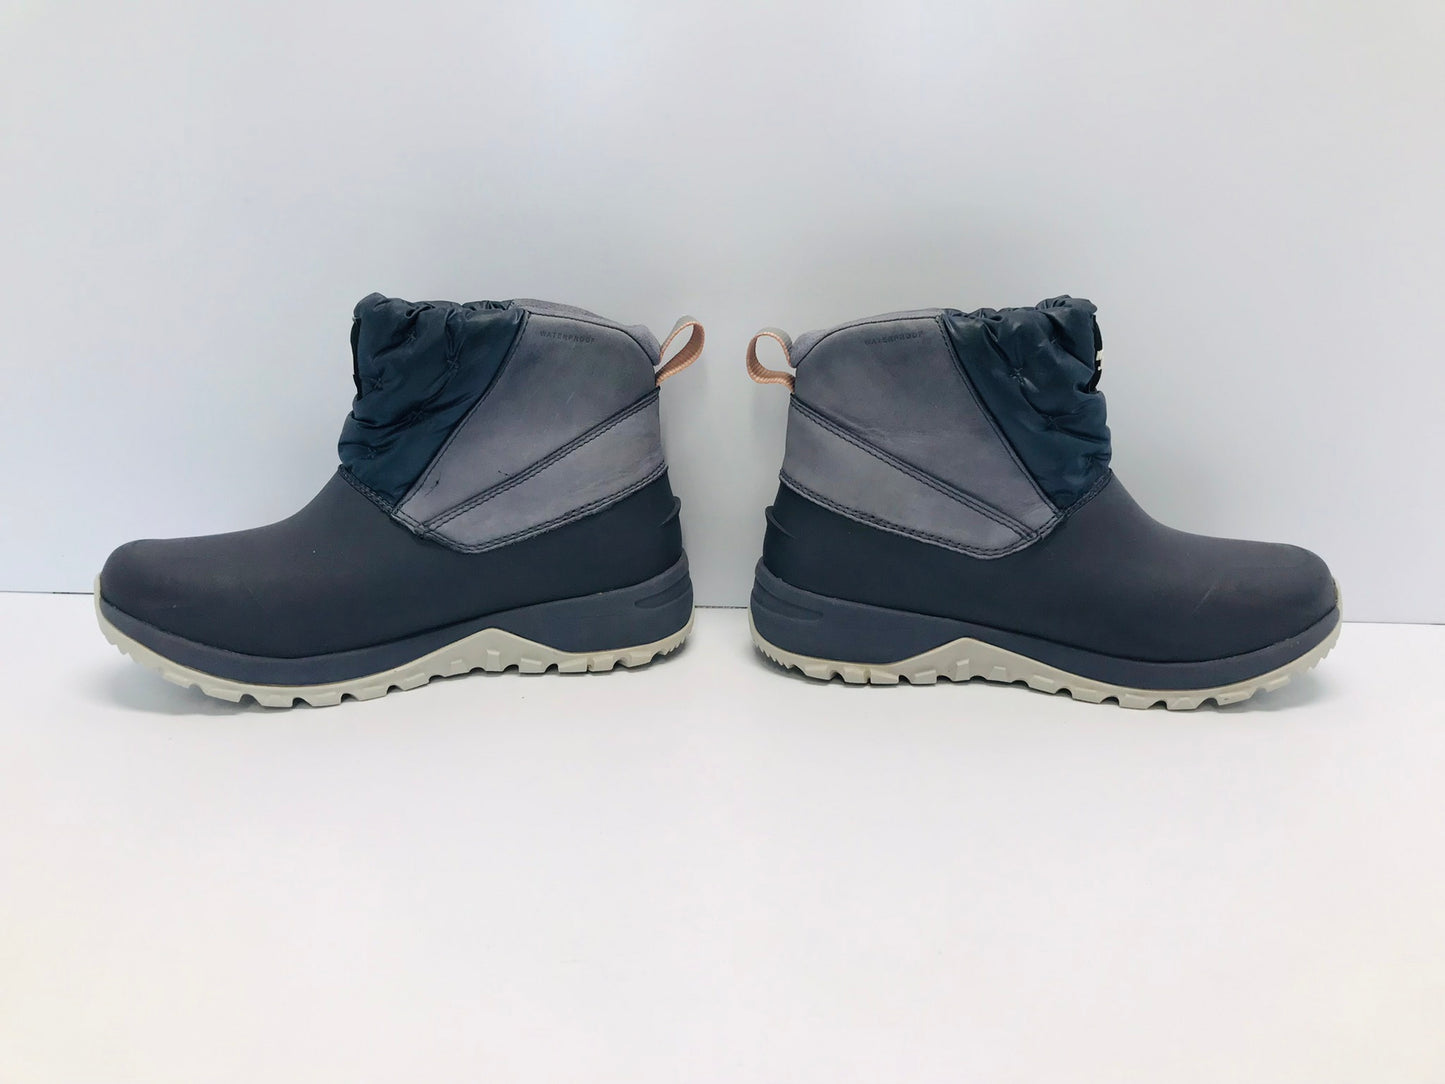 Winter Boots Ladies Size 7.5 The North Face Prima Loft Leather Top Blue Ankle Boot Like New